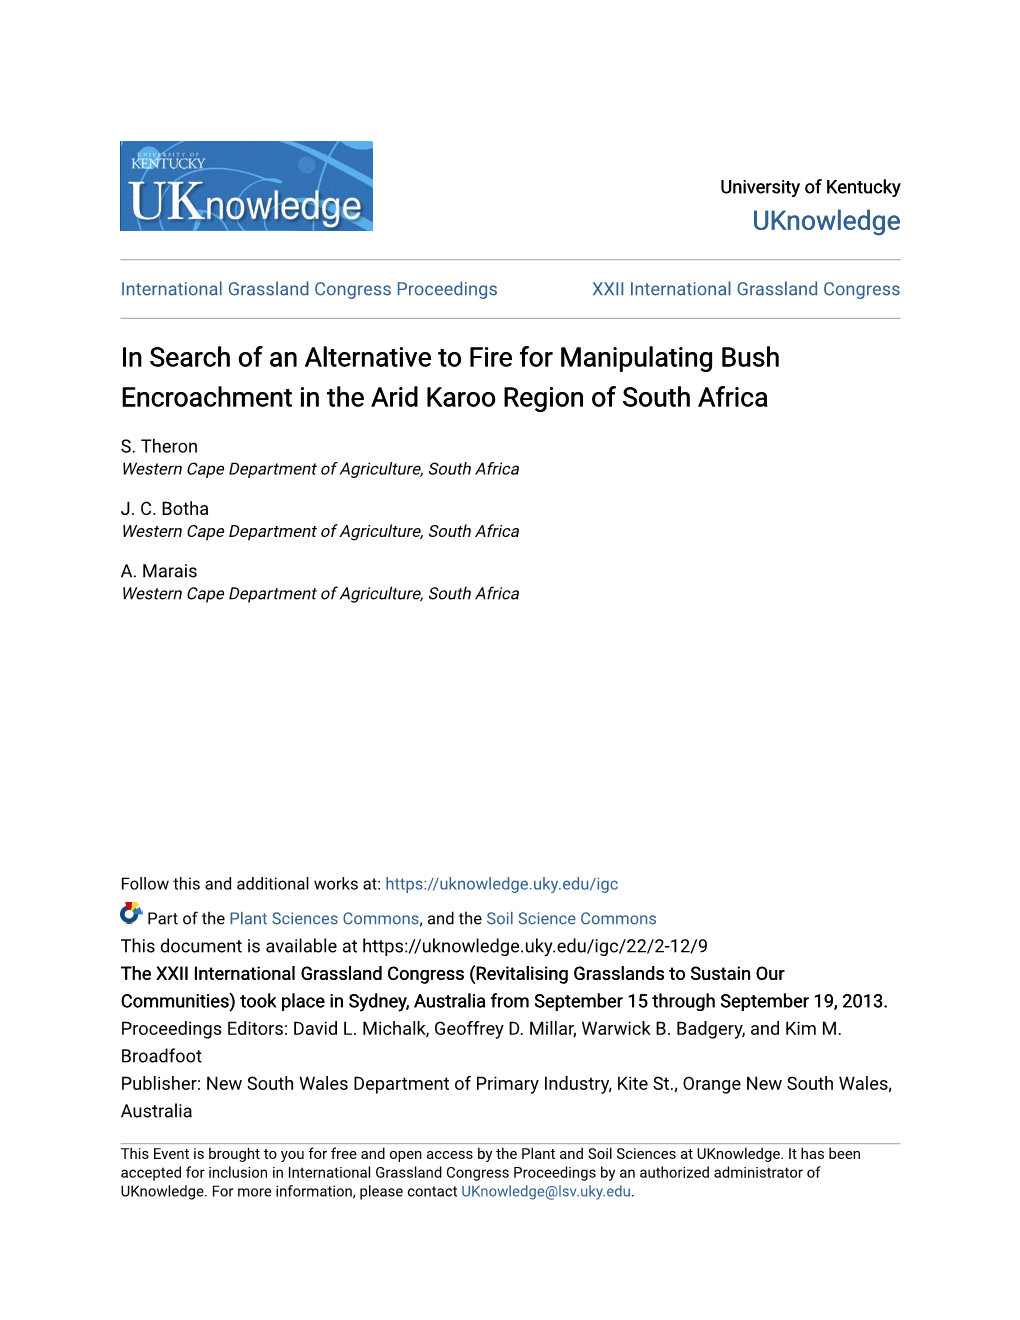 In Search of an Alternative to Fire for Manipulating Bush Encroachment in the Arid Karoo Region of South Africa